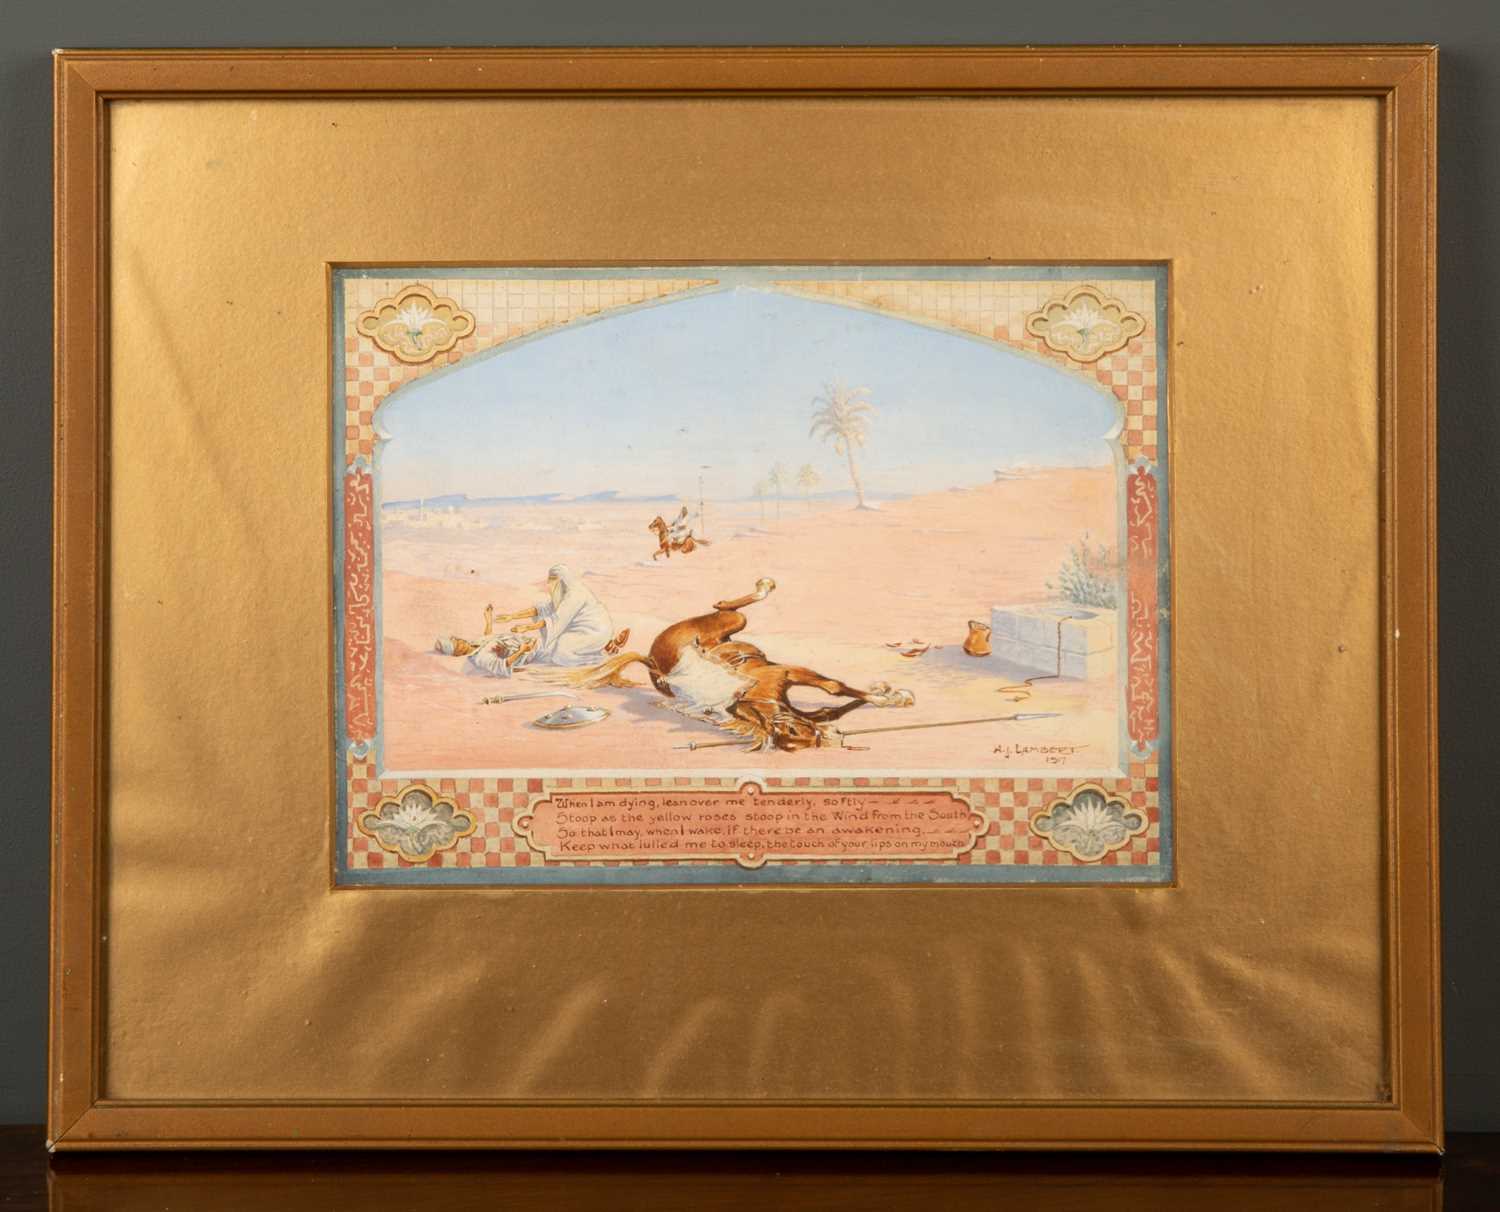 A.J. Lambert an Arabic Desert Scene, gouache on paper, signed and dated 1917 lower right above a